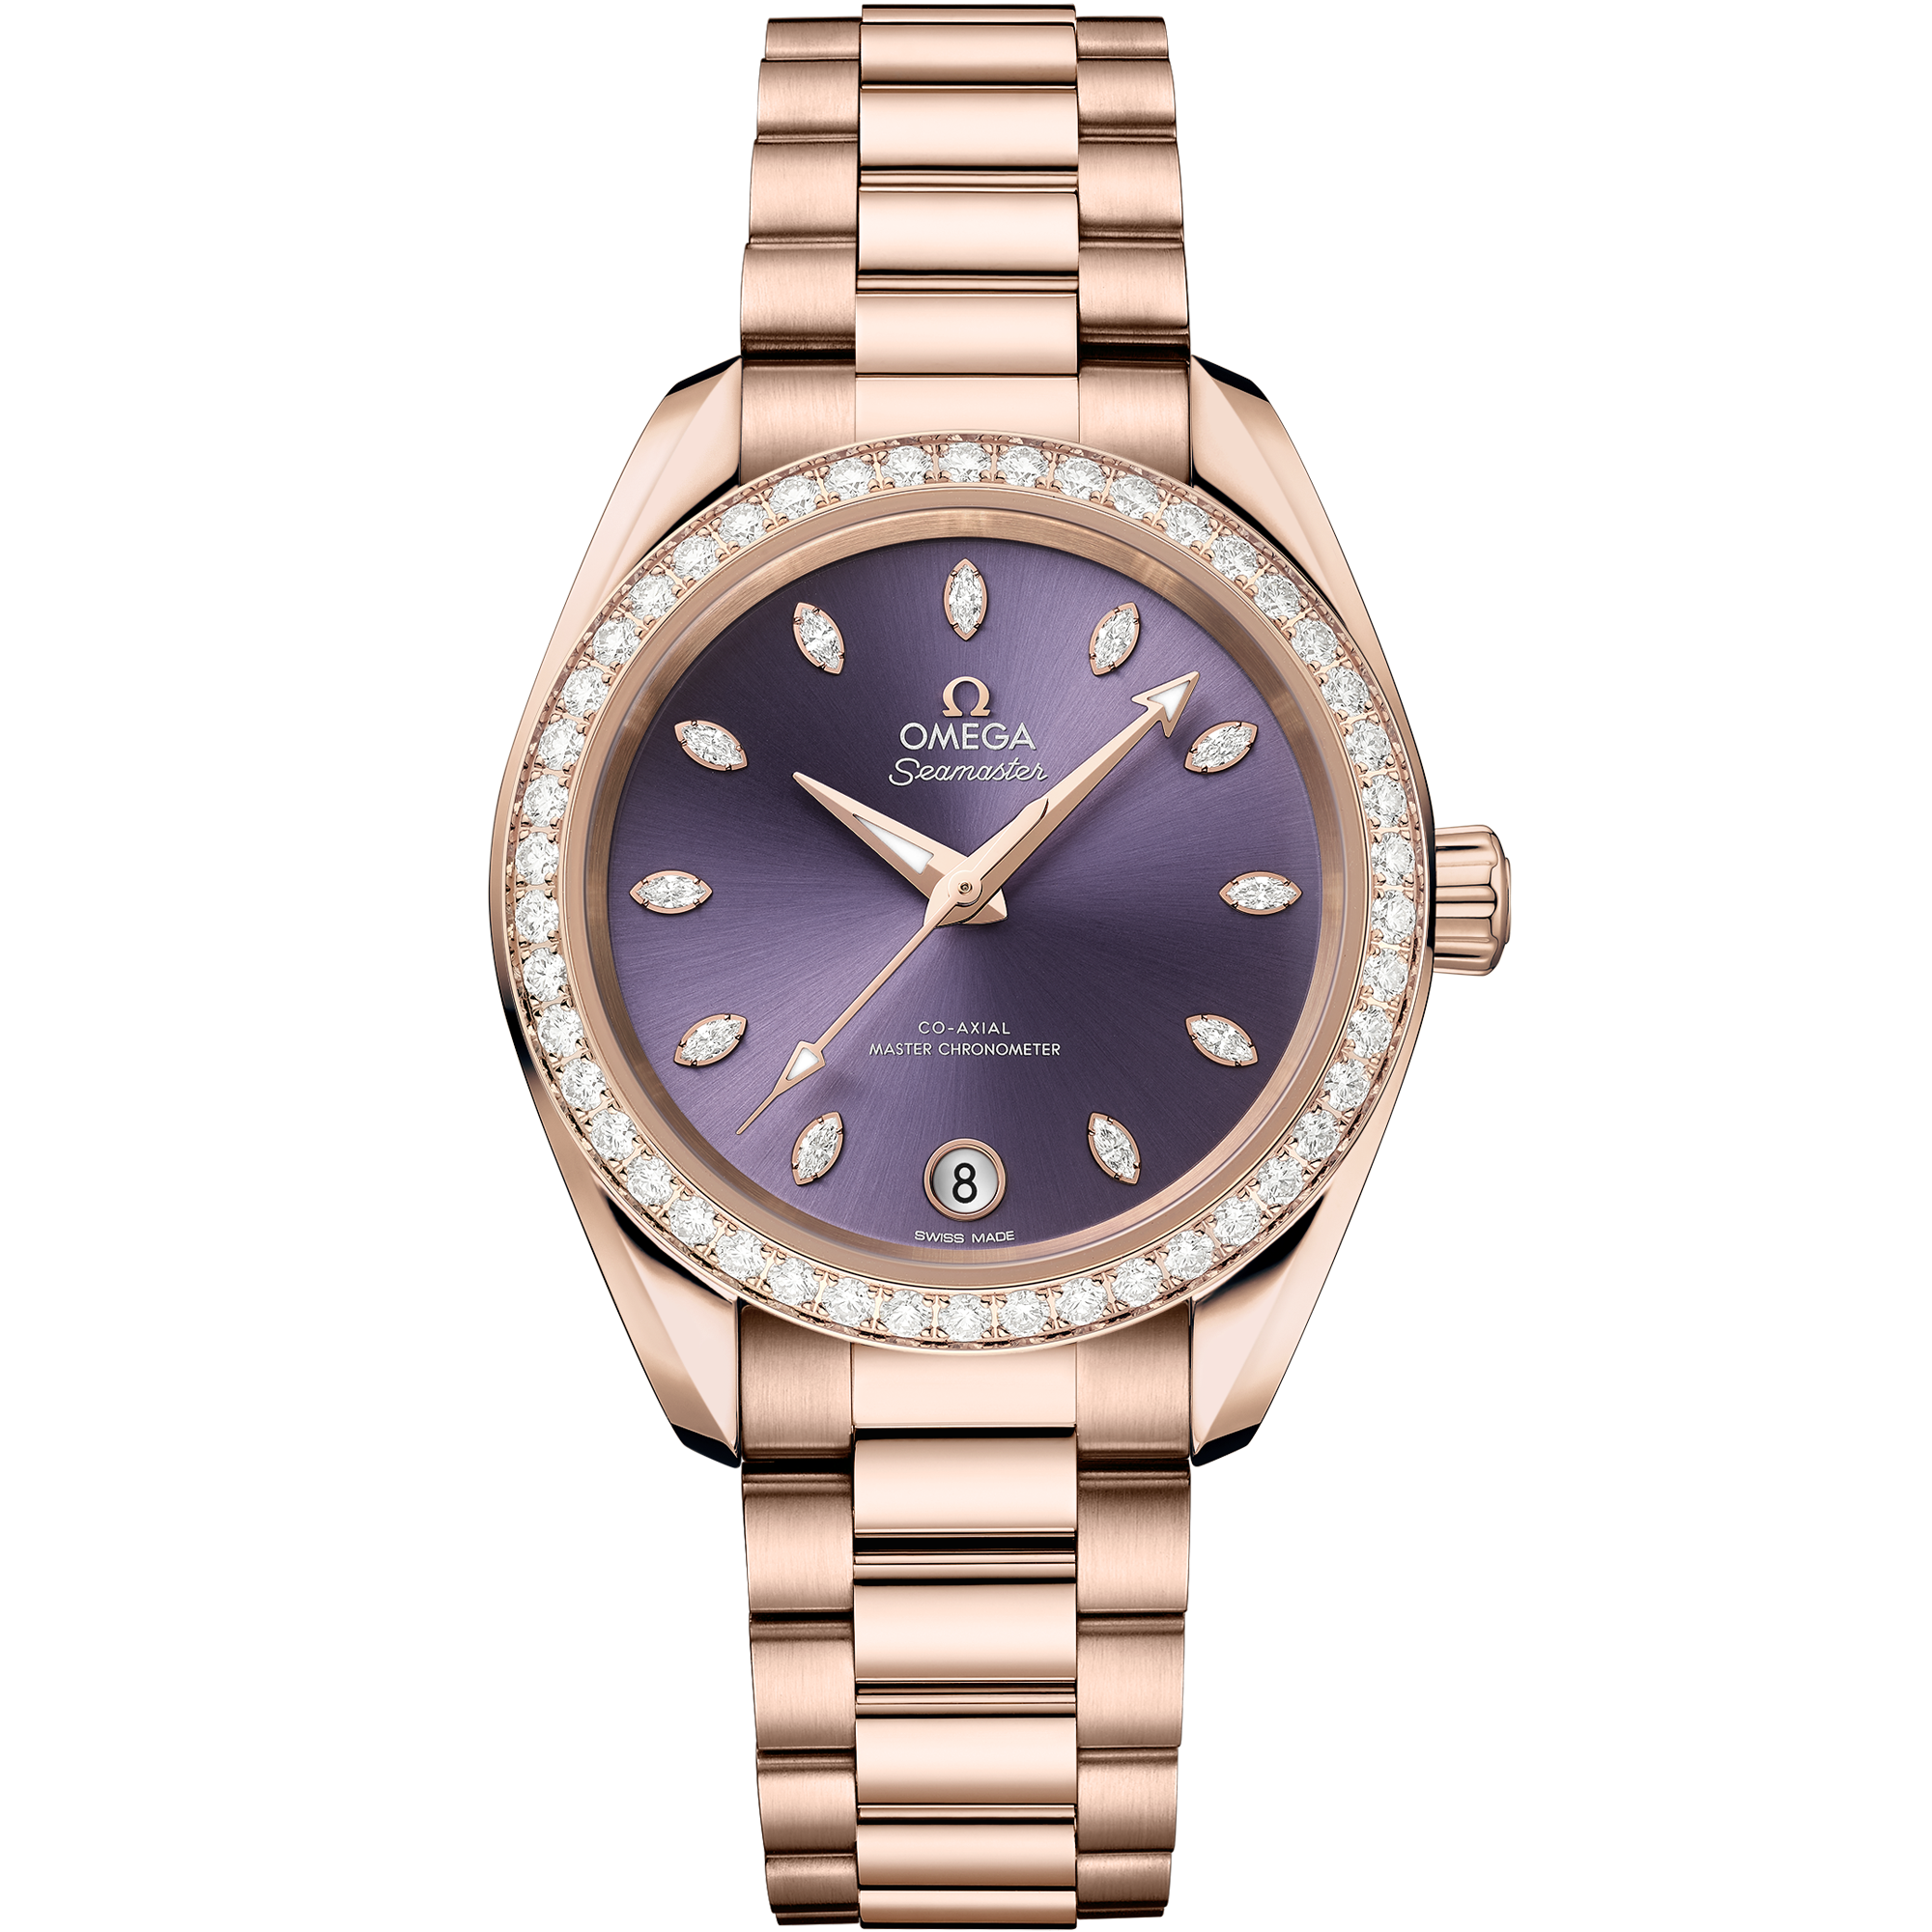 Seamaster 34 mm, ouro Sedna™ em ouro Sedna™ - 220.55.34.20.60.001